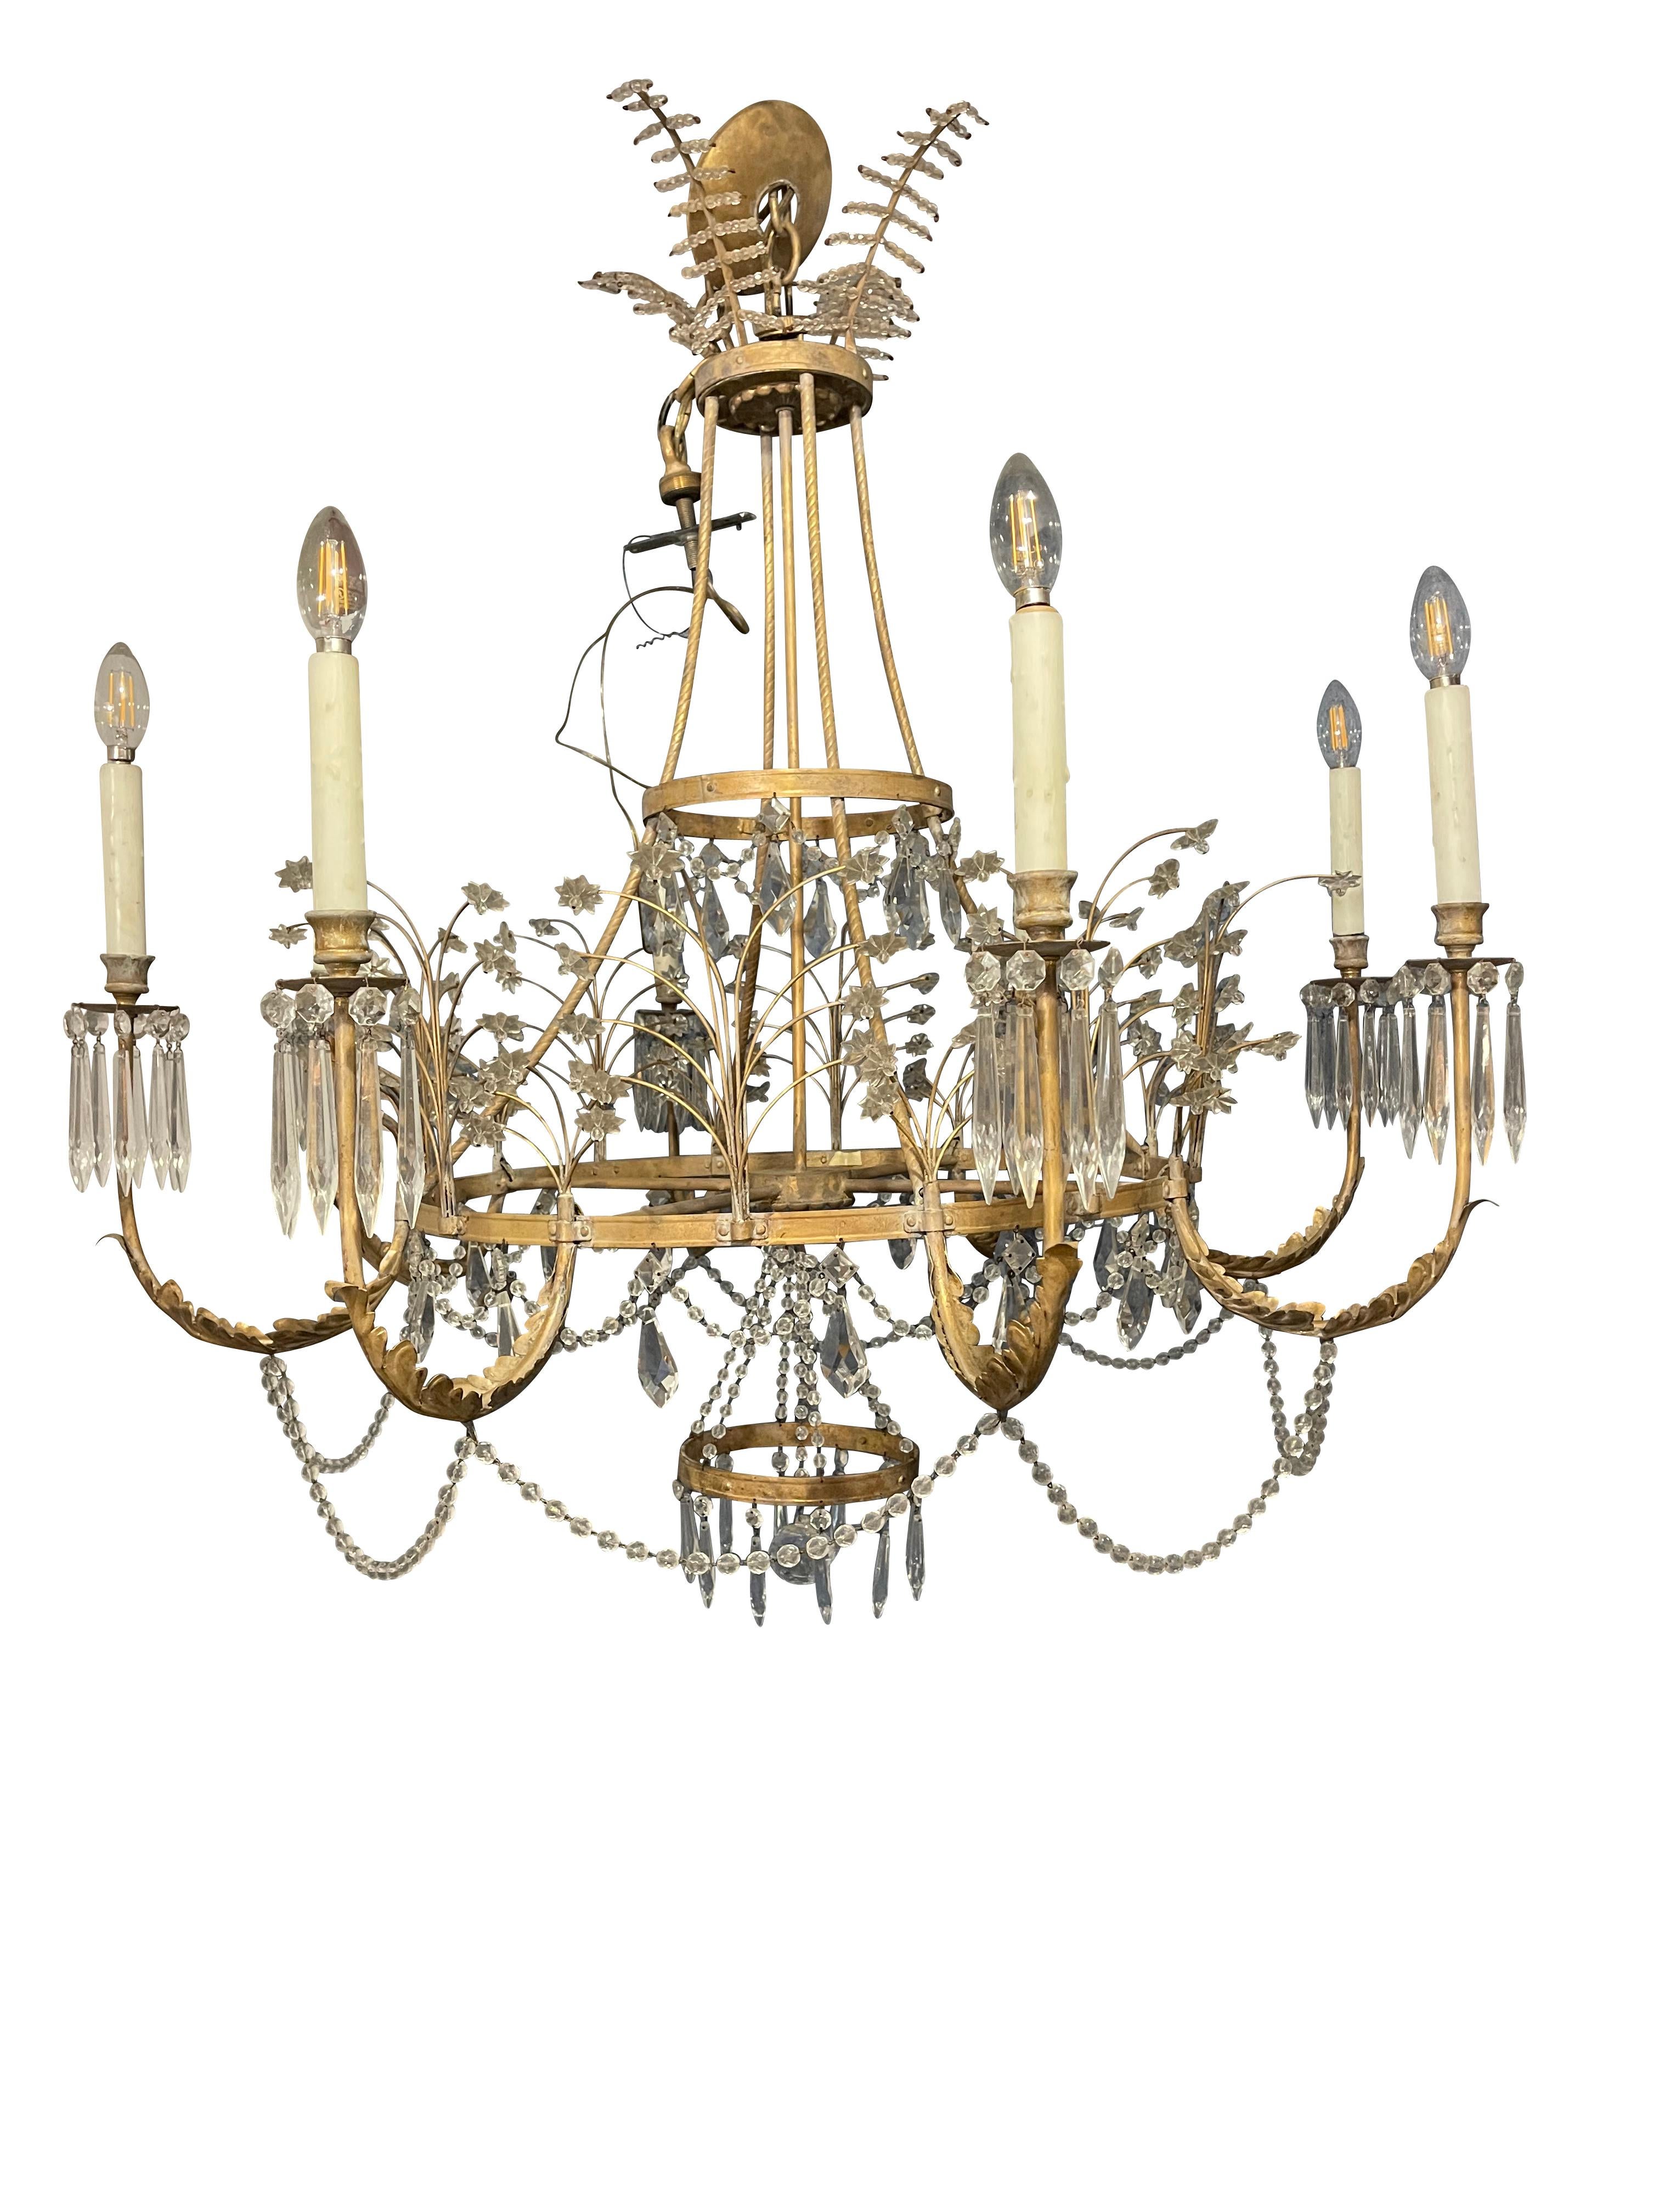 20th Century Neoclassical Swedish Style Crystal and Gilt Bronze Chandelier  In Good Condition For Sale In Essex, MA